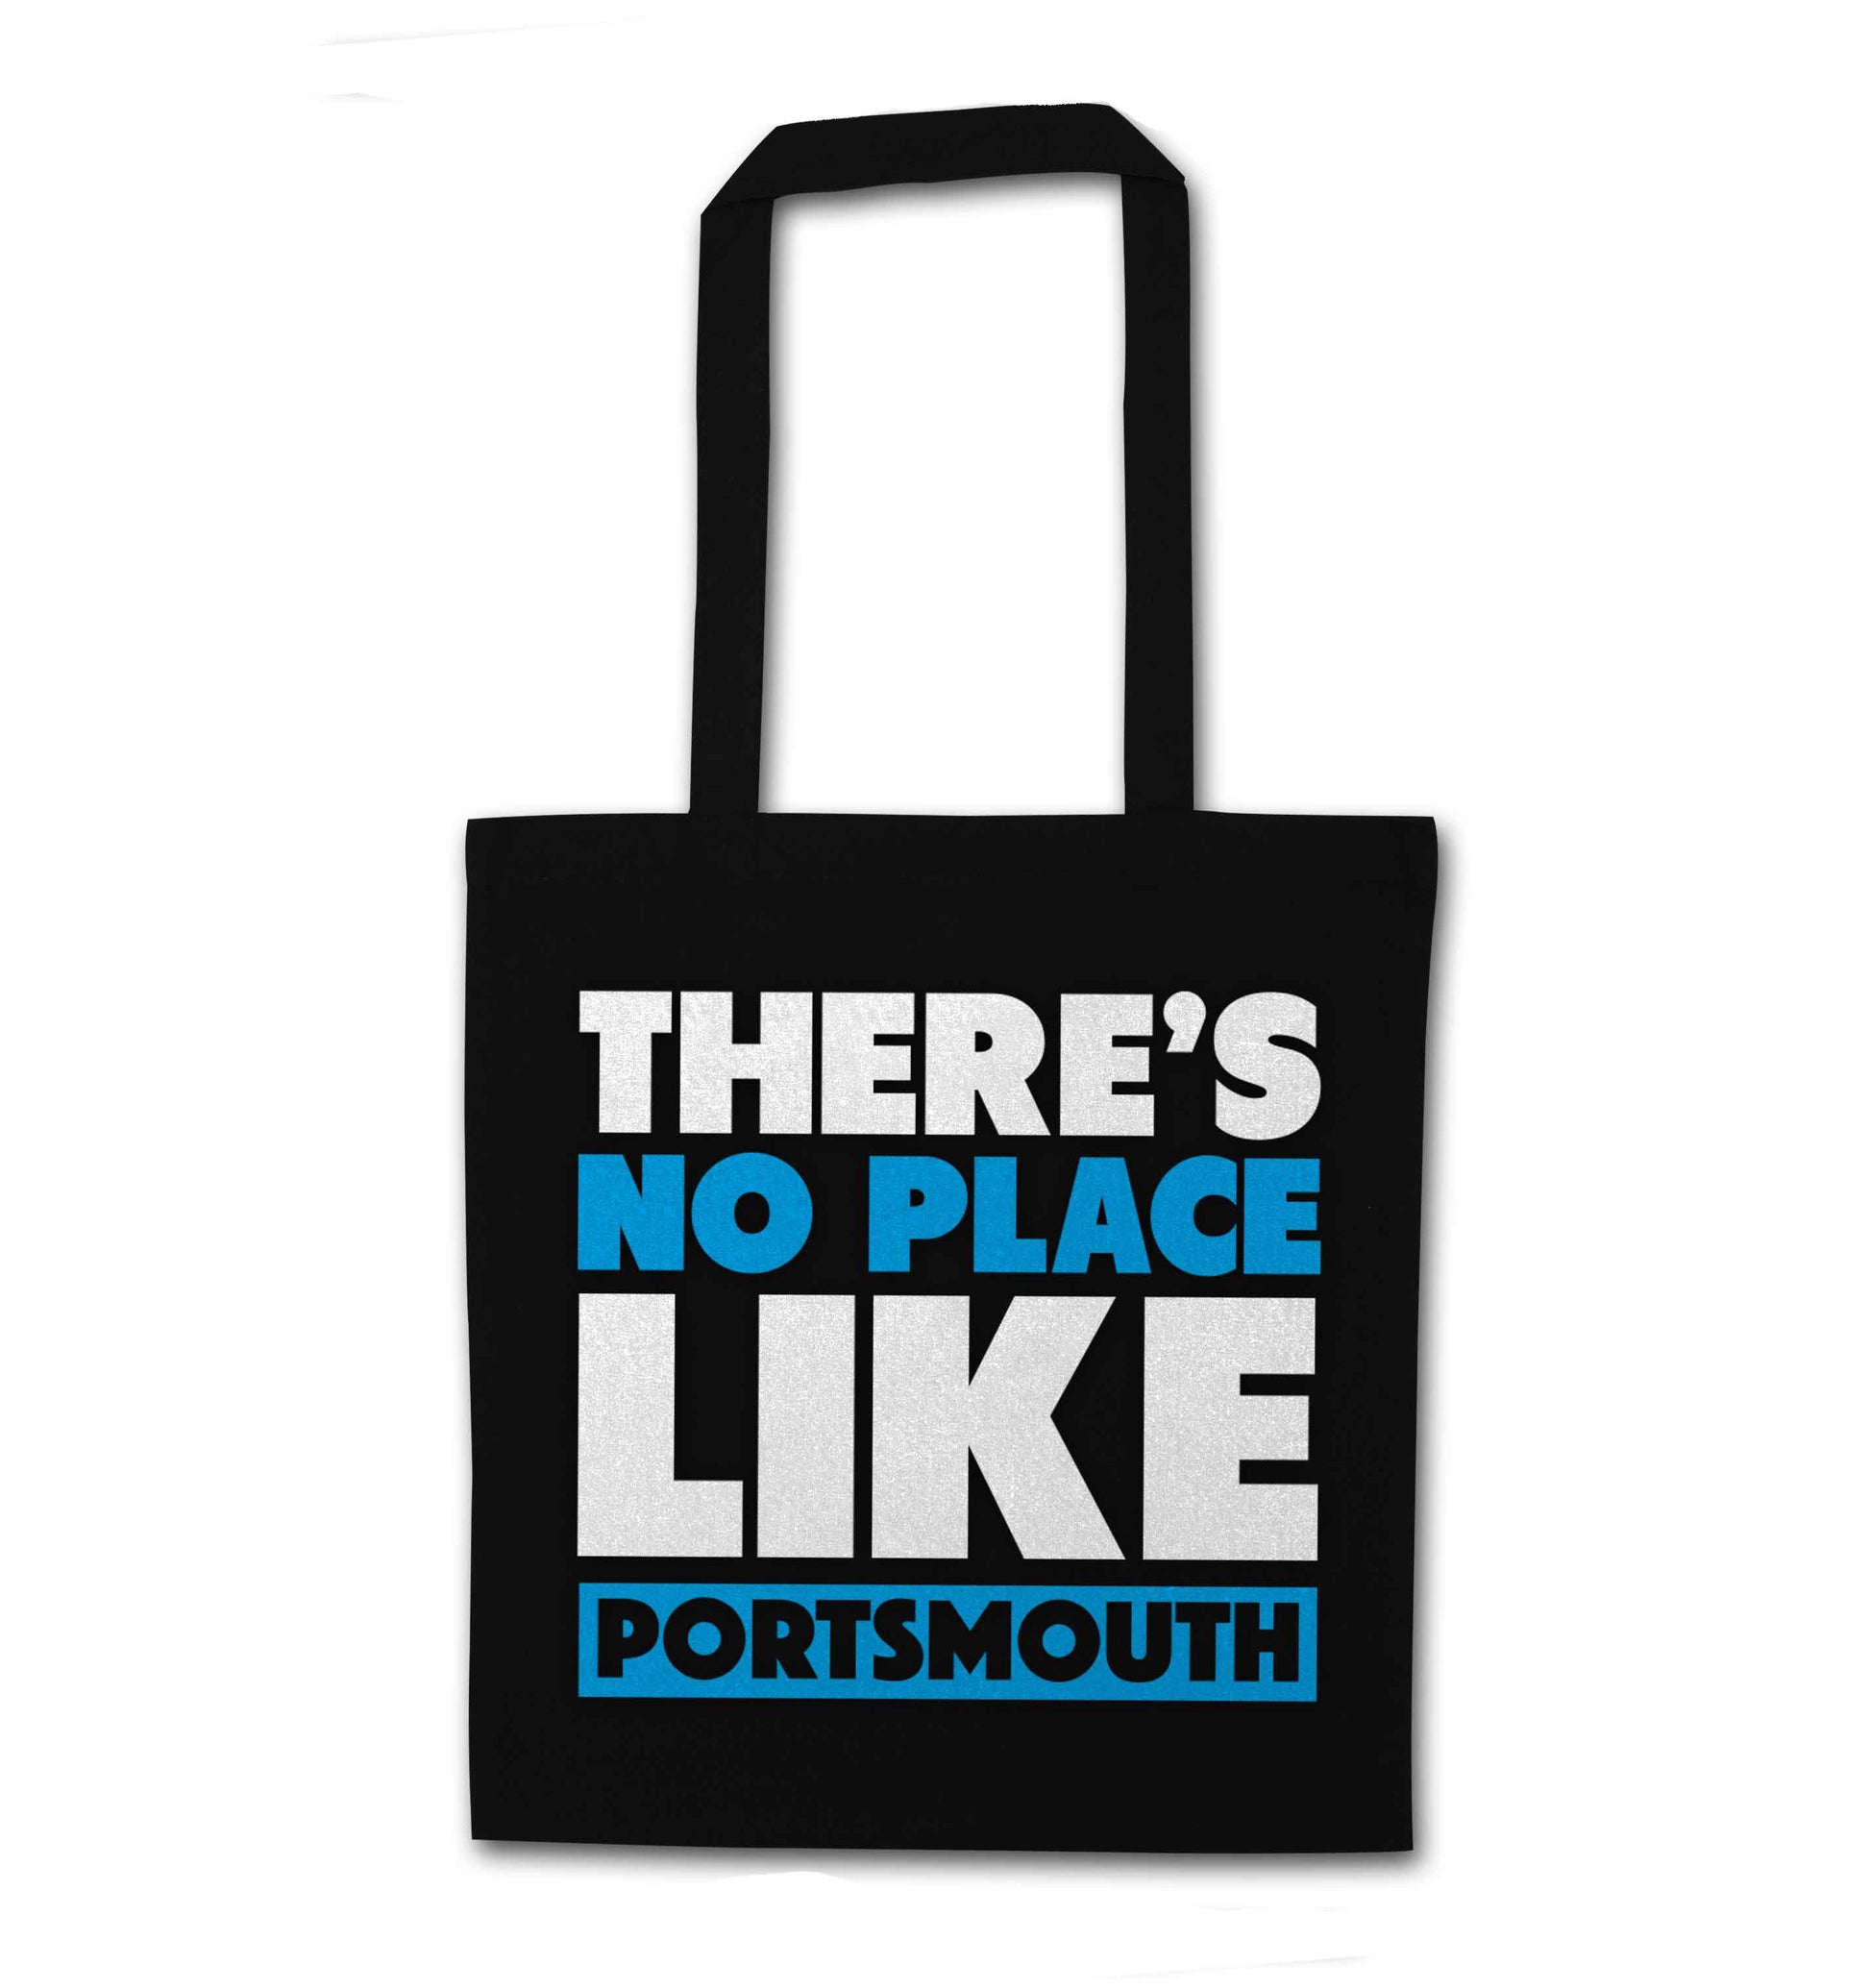 There's no place like Porstmouth black tote bag